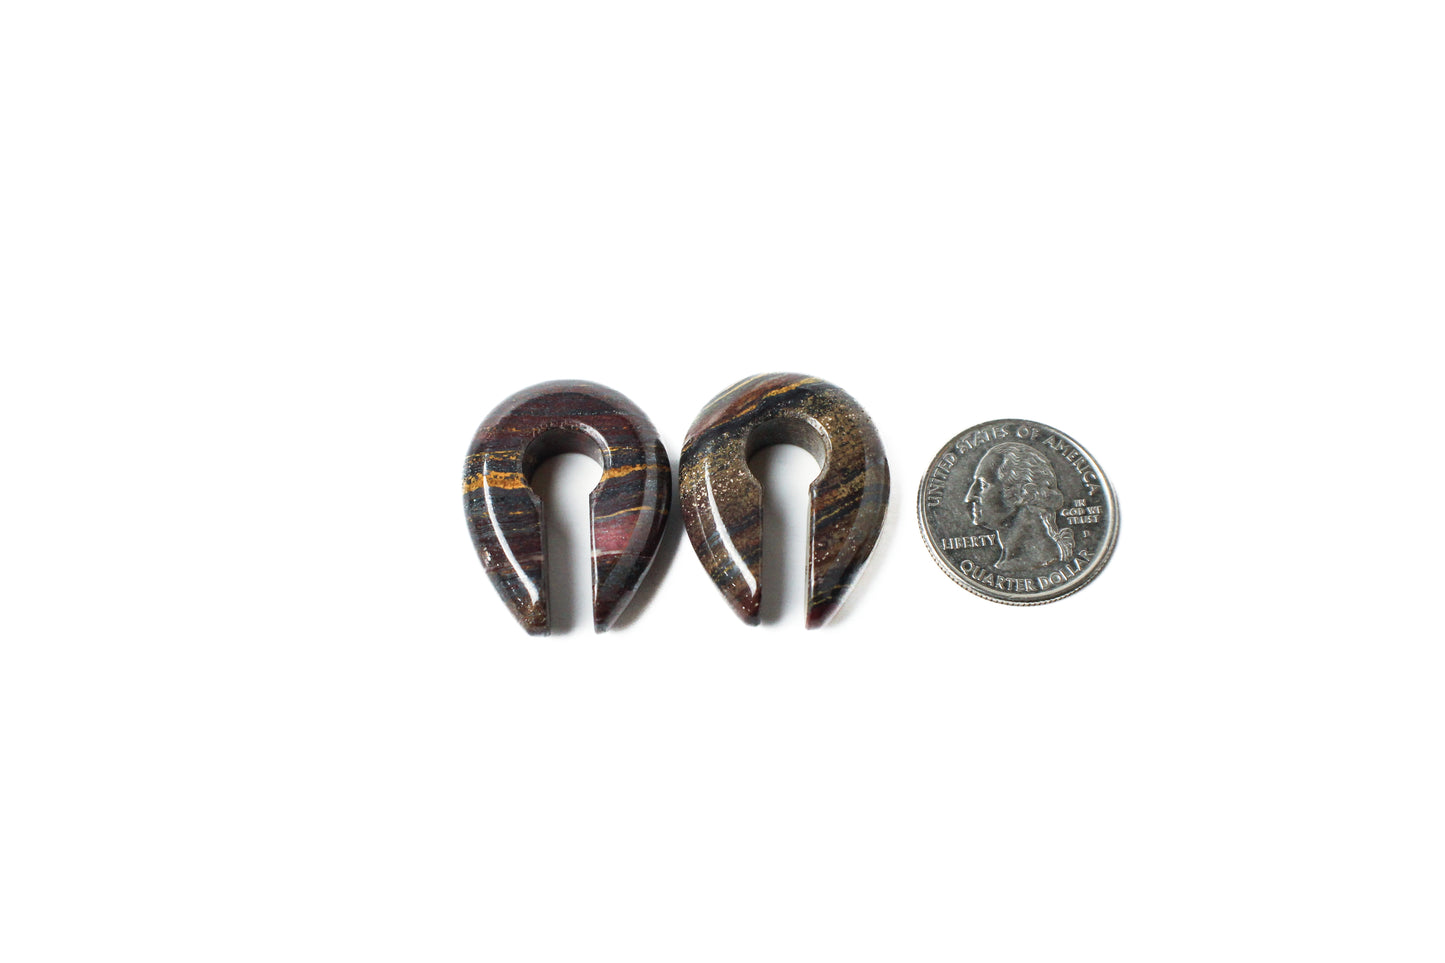 00G (9.5mm)+  Tiger Iron Keyhole Weights